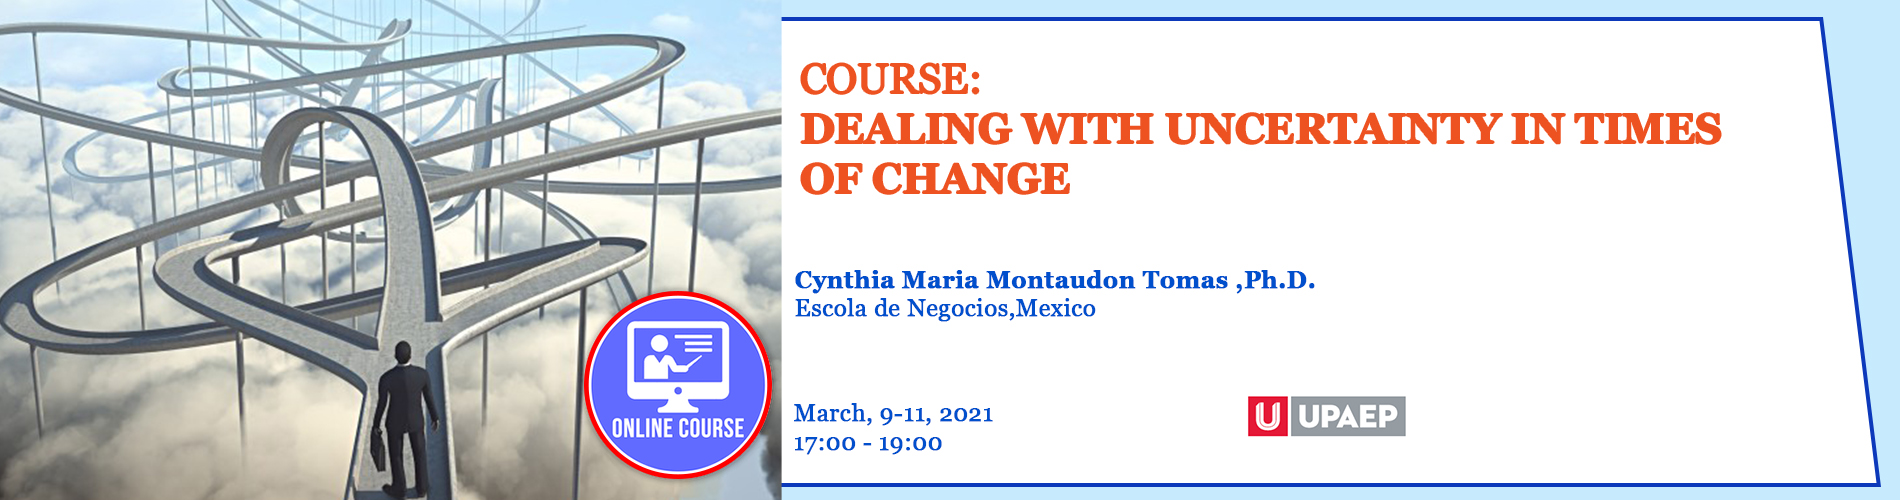 2021.03.09- 2021.03.11 - Dealing with uncertainty in times of change